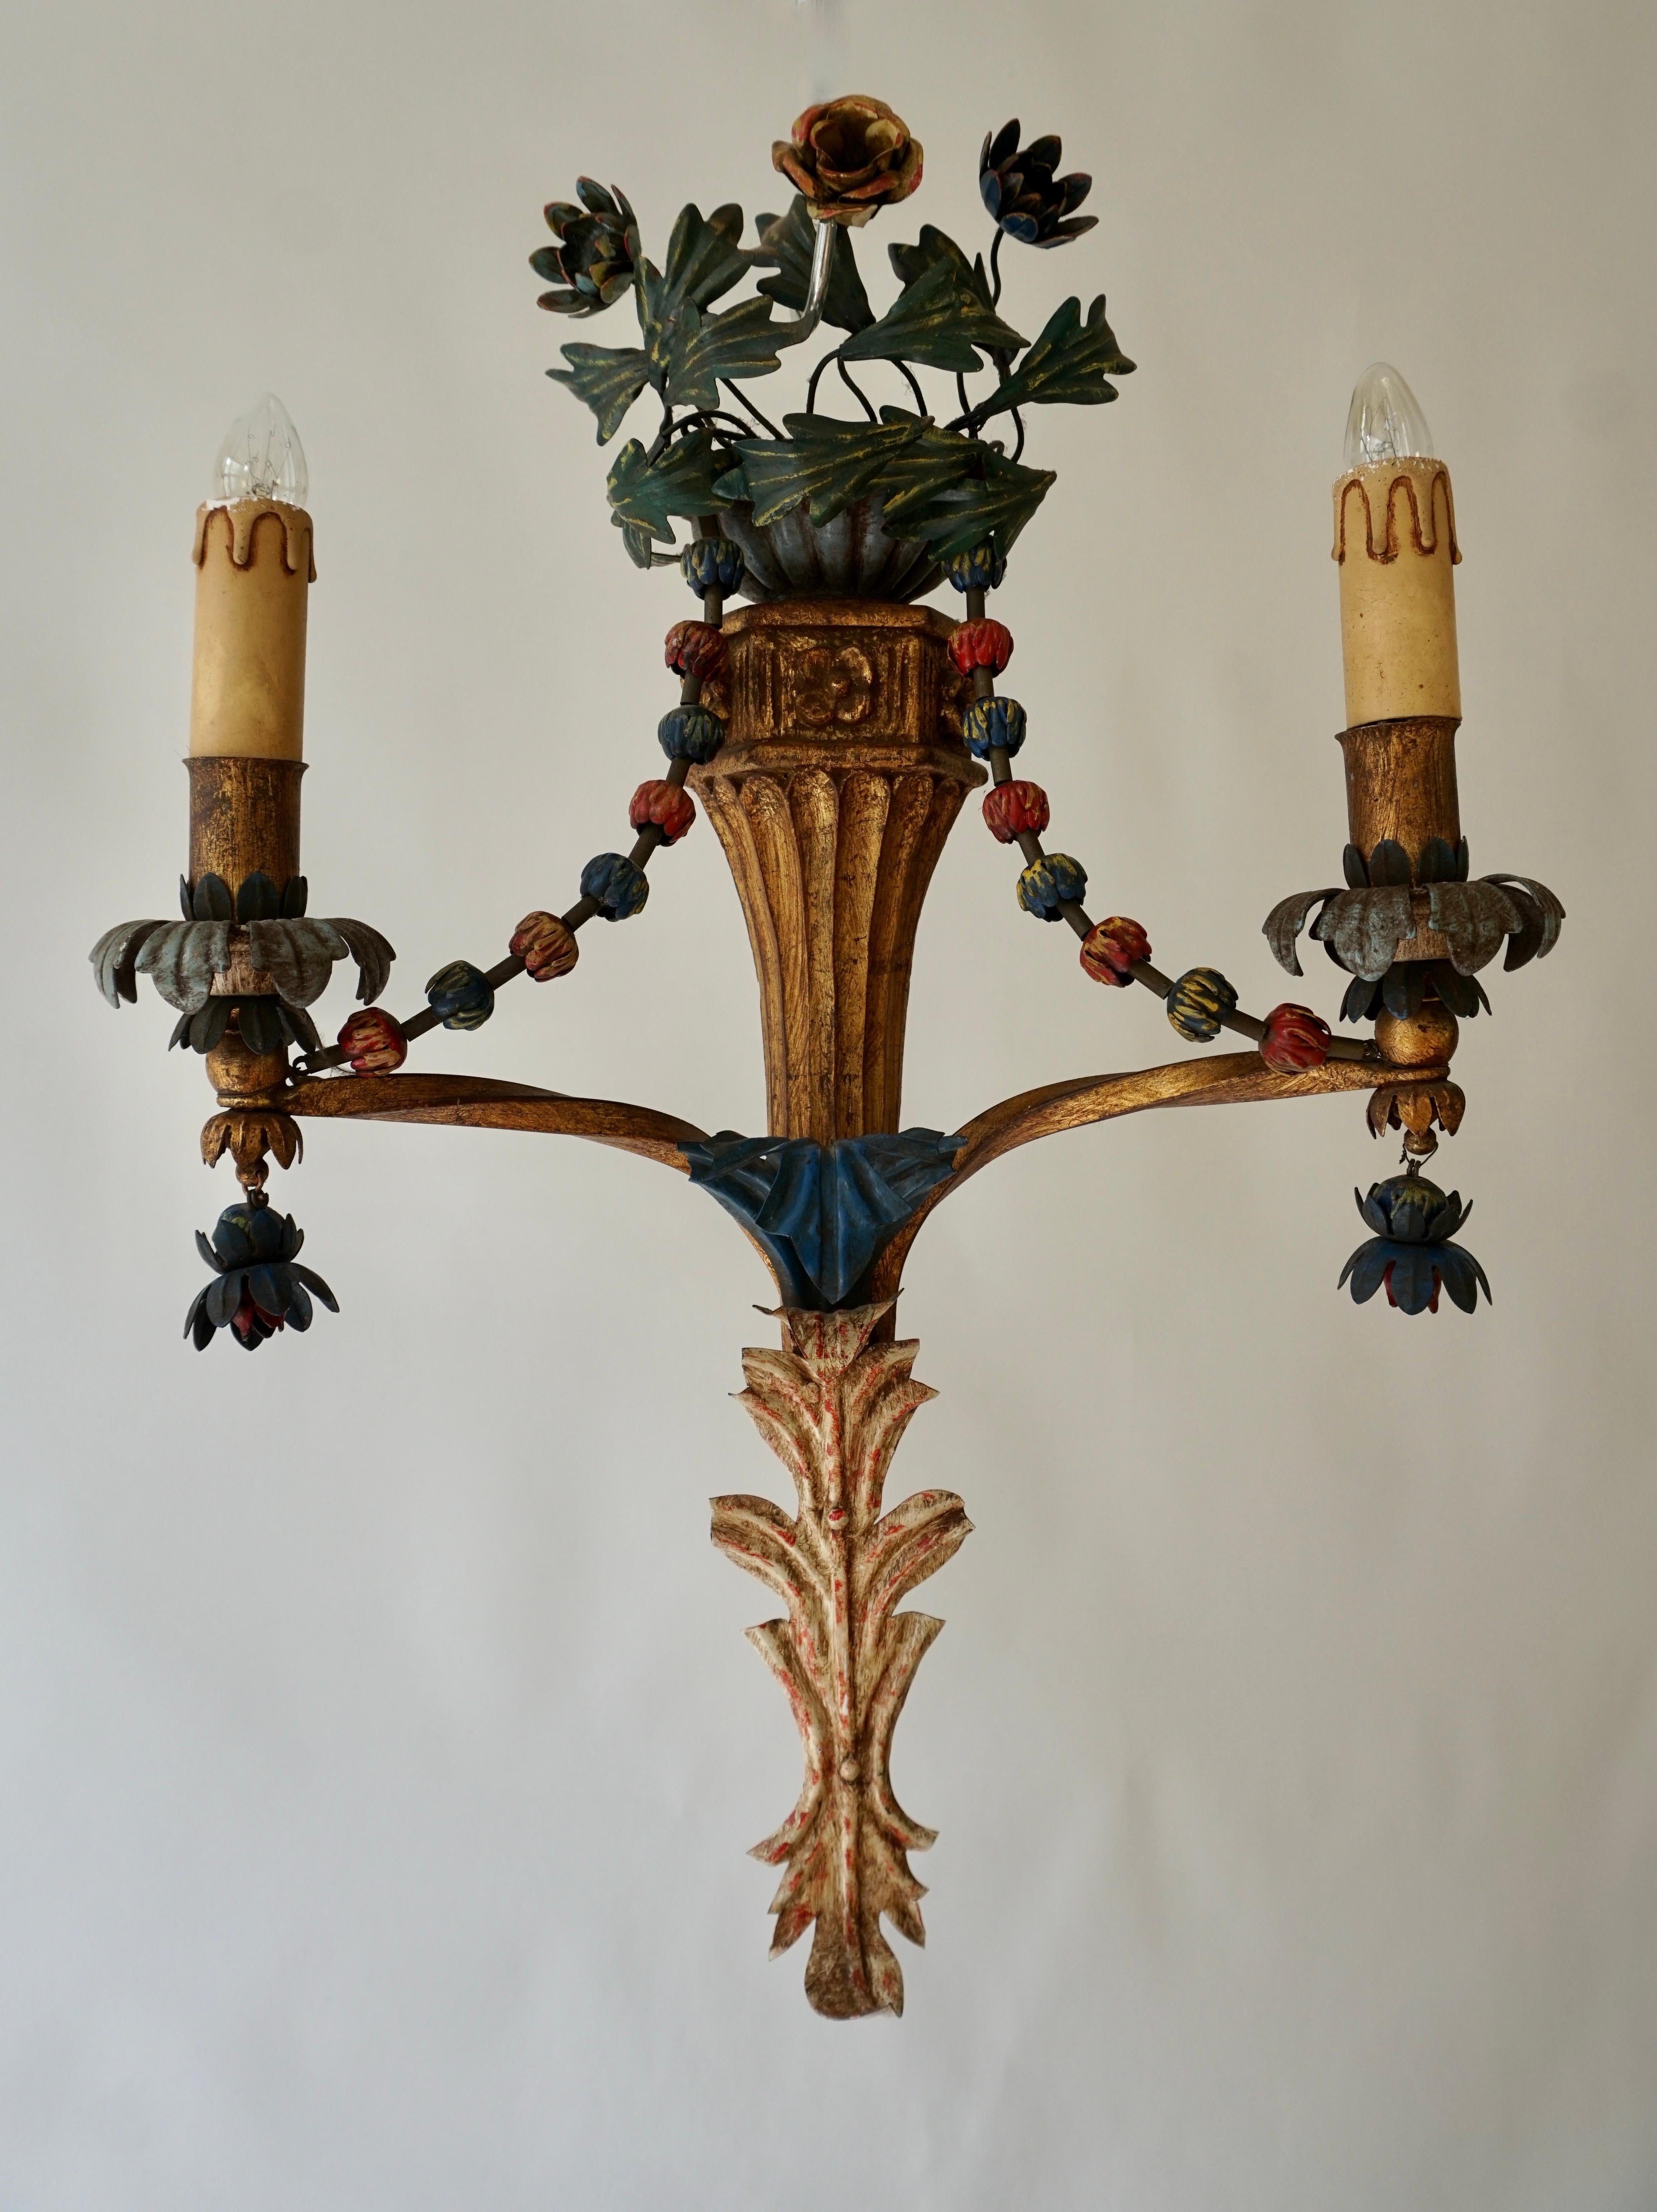 Four beautiful Italian tole wall sconces with colorful hand-painted flowers from the past century. 
Each wall light is wired for two small light bulbs with max. 60W. 
Very good vintage and working condition.